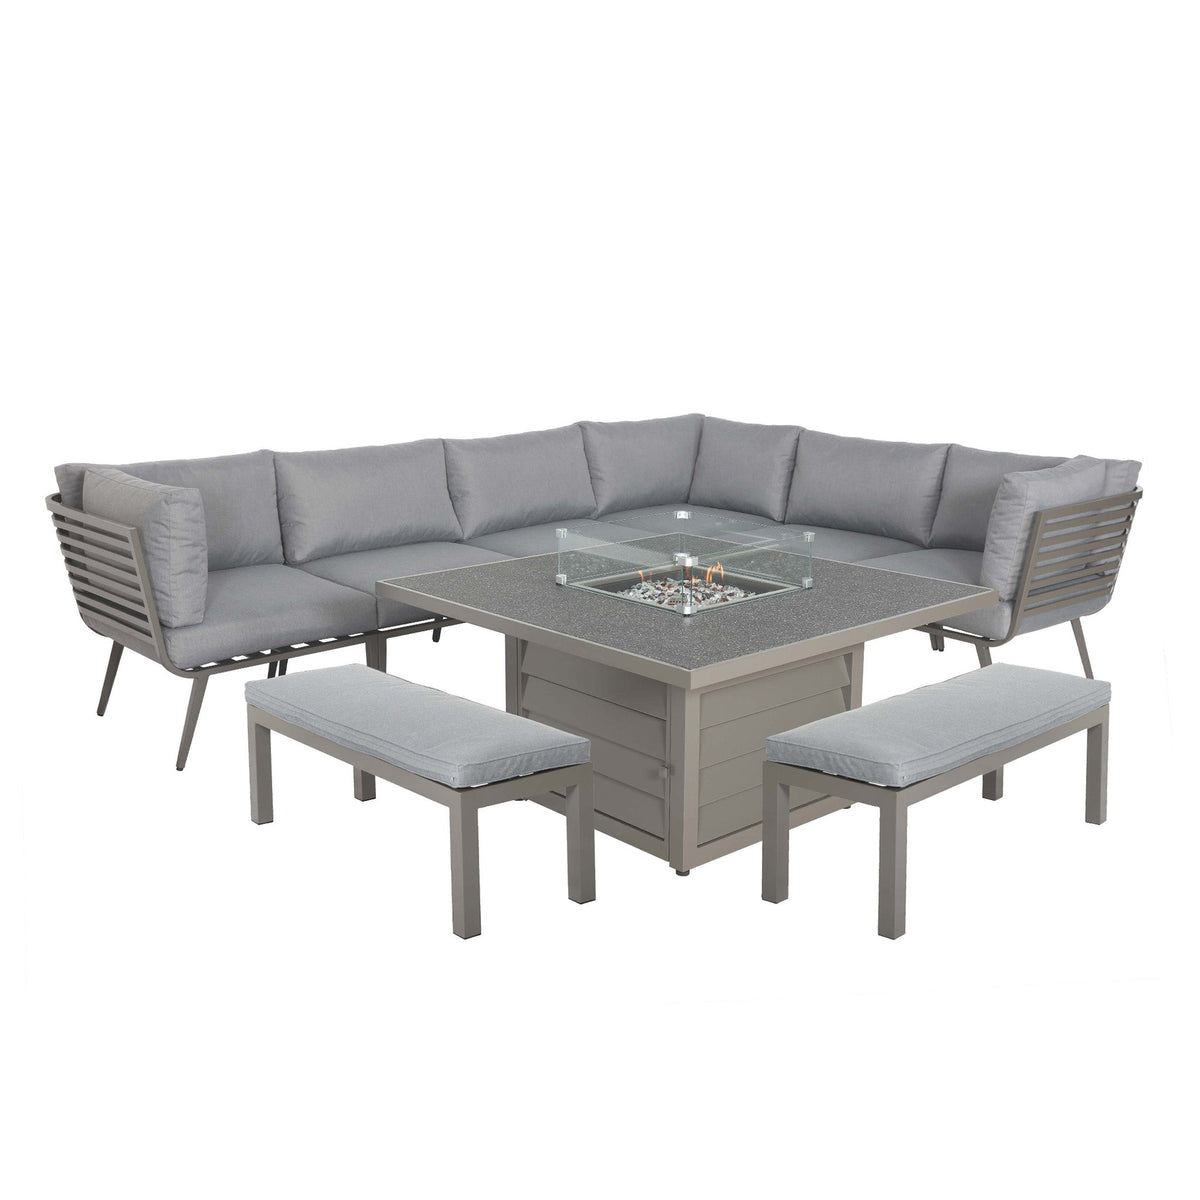 Mayfair 120cm Grey Outdoor Corner Fire Pit Table Lounge Set from Roseland Furniture